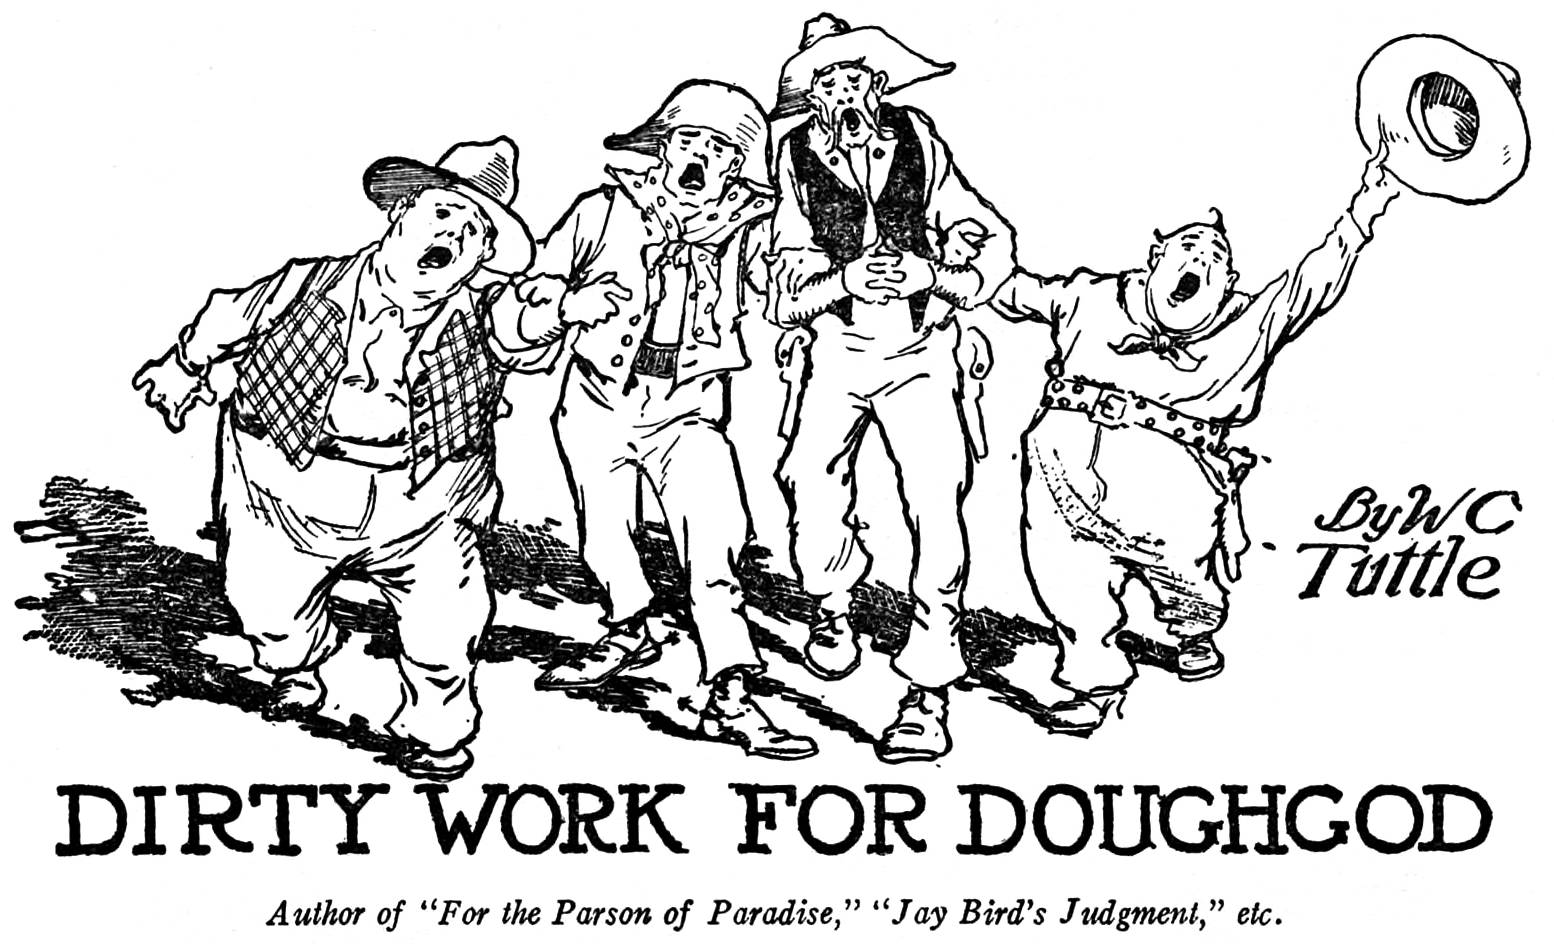 Dirty Work for Doughgod